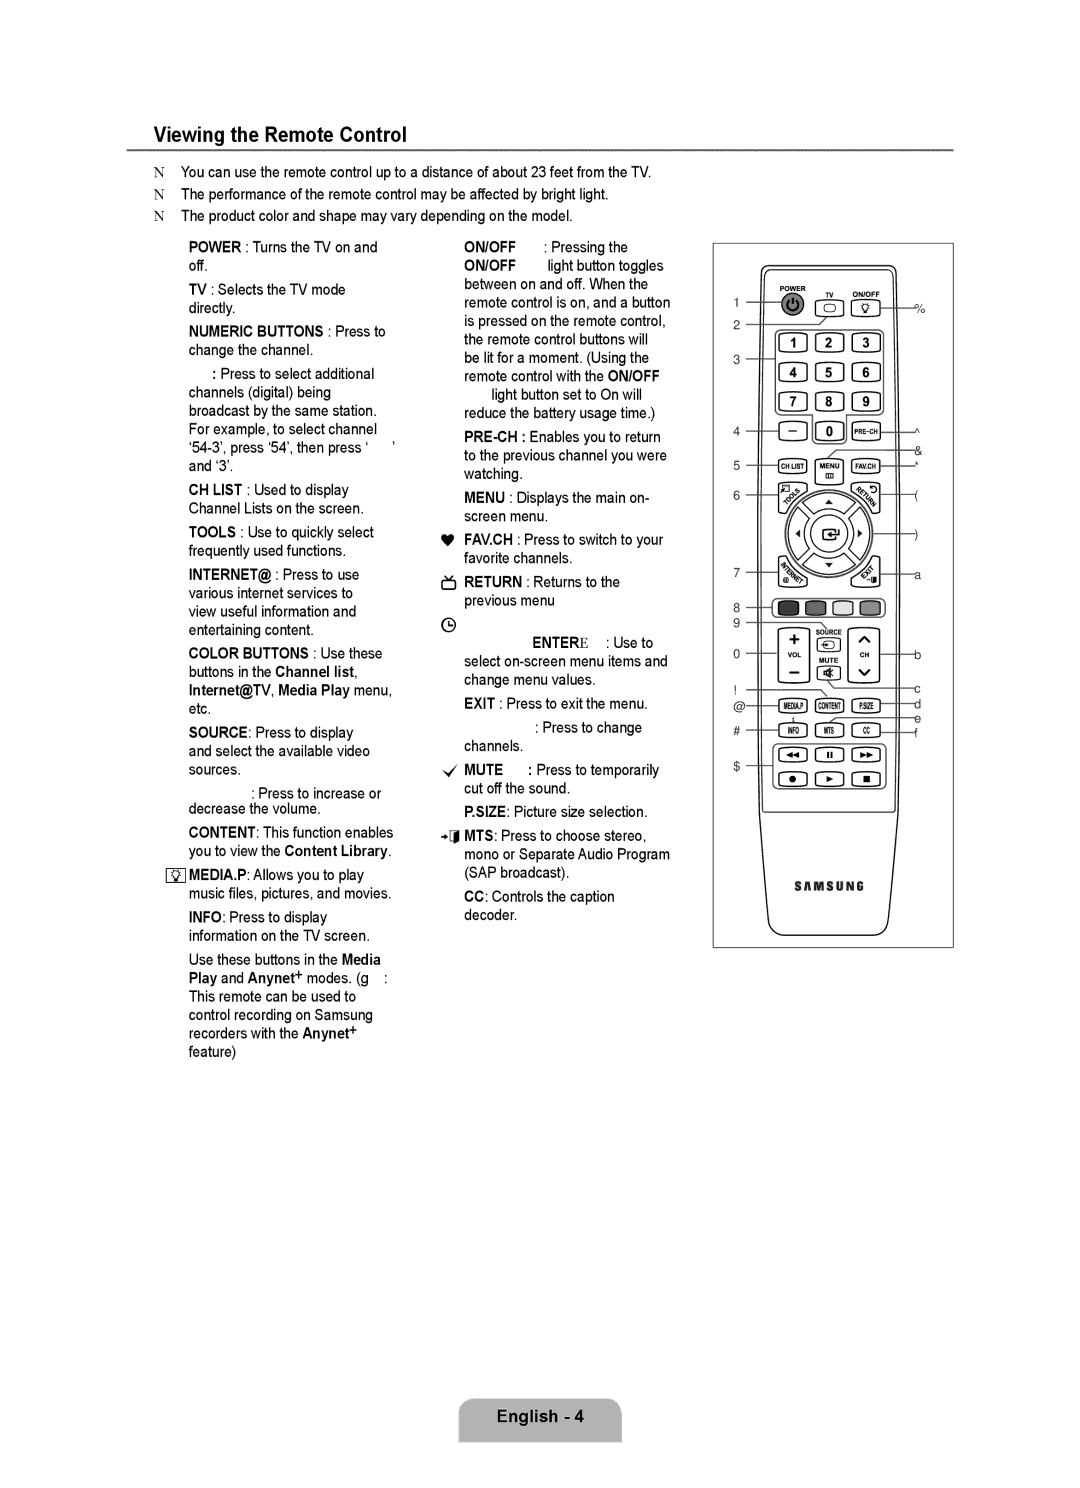 Samsung LN6B60 user manual Viewing the Remote Control, Numeric Buttons Press to change the channel 